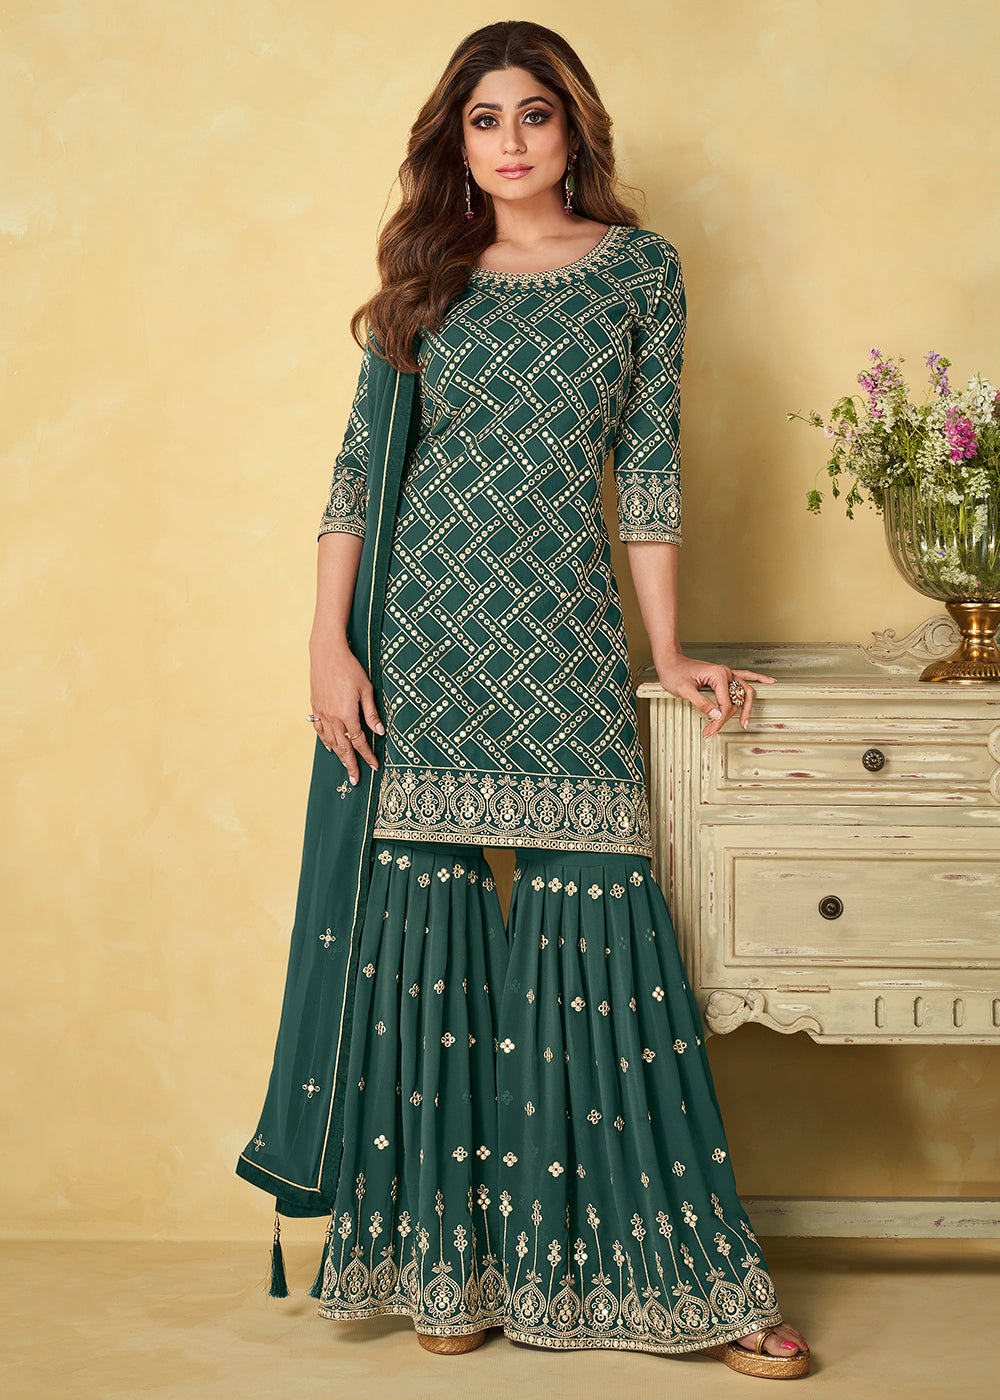 Buy Now Foil Mirror Glamorous Teal Green Festive Wear Palazzo Salwar Suit Online in USA, UK, Canada, Germany & Worldwide at Empress Clothing.